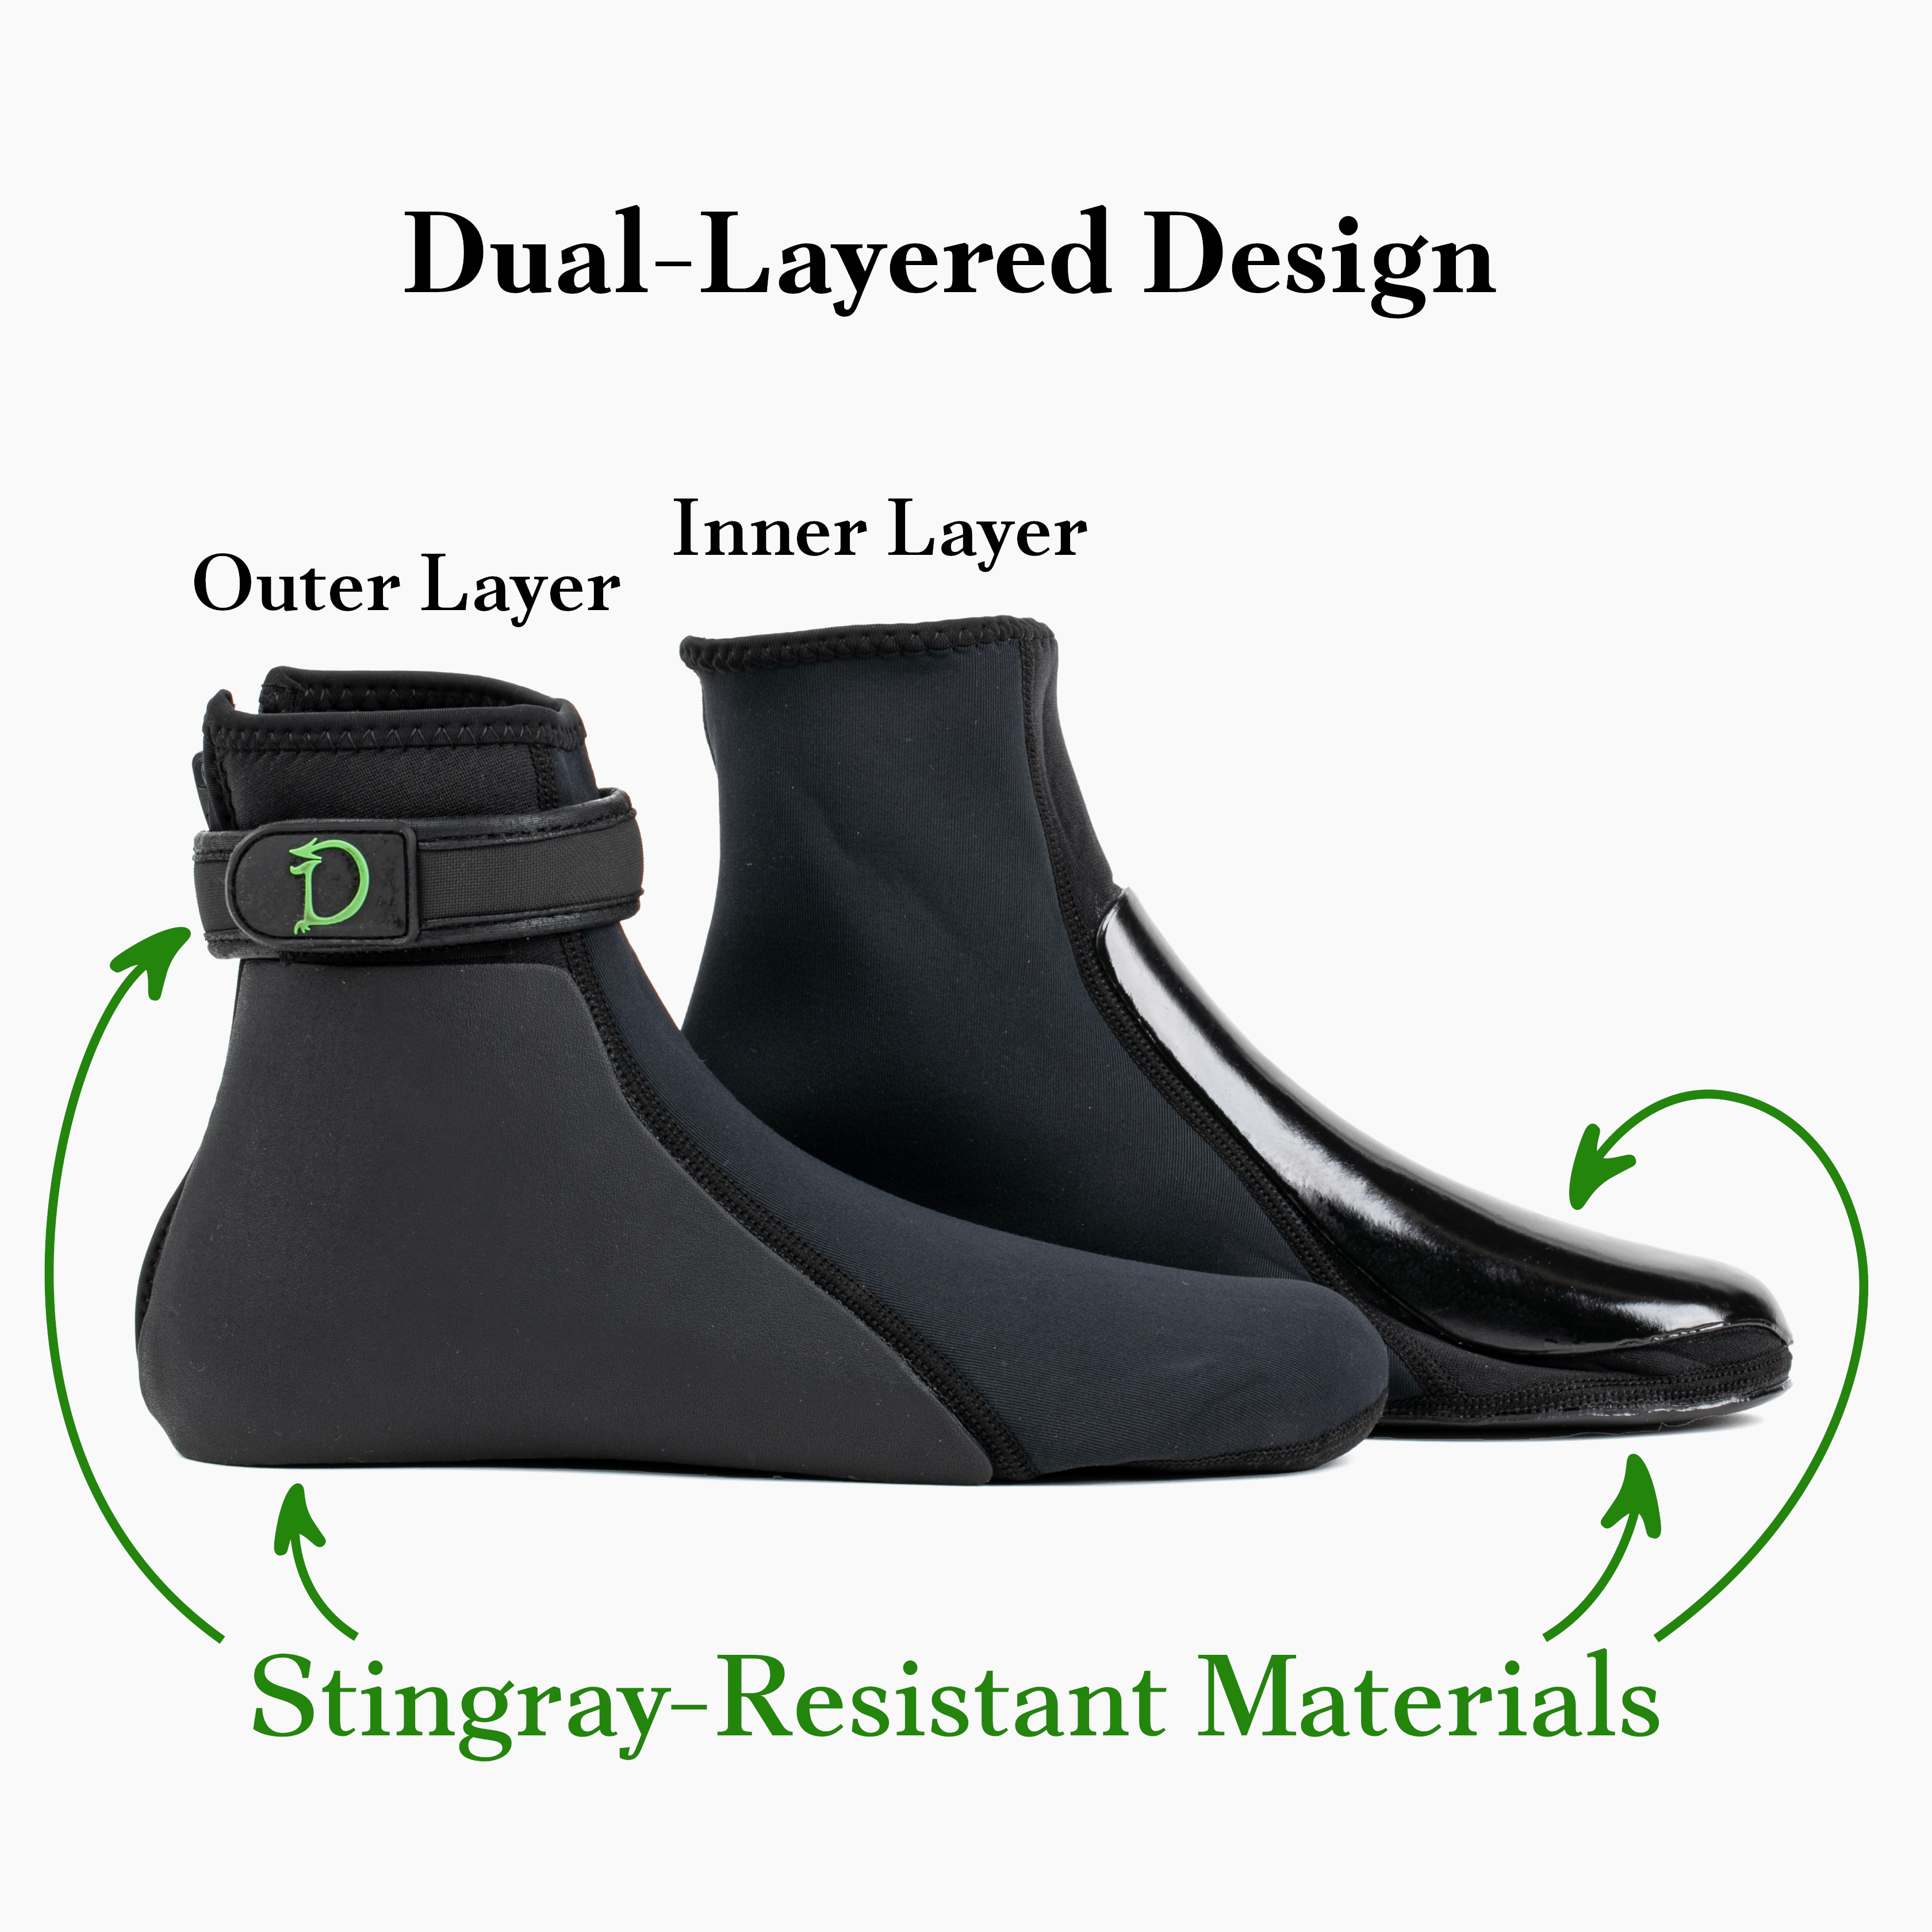 Dual Layer design of stingray resistant bootie